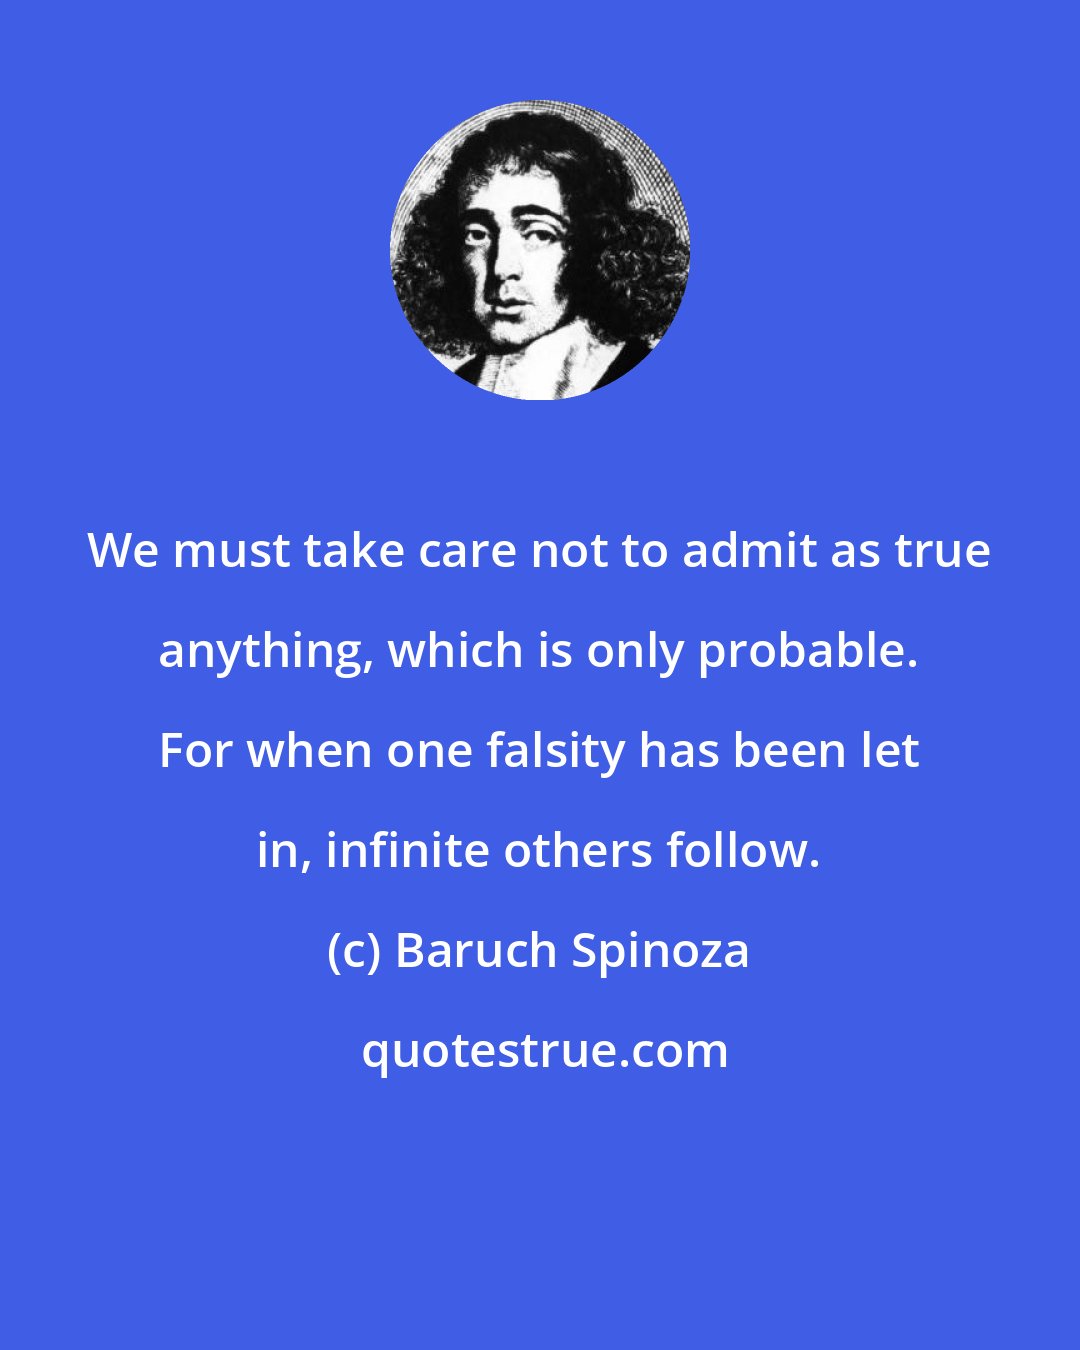 Baruch Spinoza: We must take care not to admit as true anything, which is only probable. For when one falsity has been let in, infinite others follow.